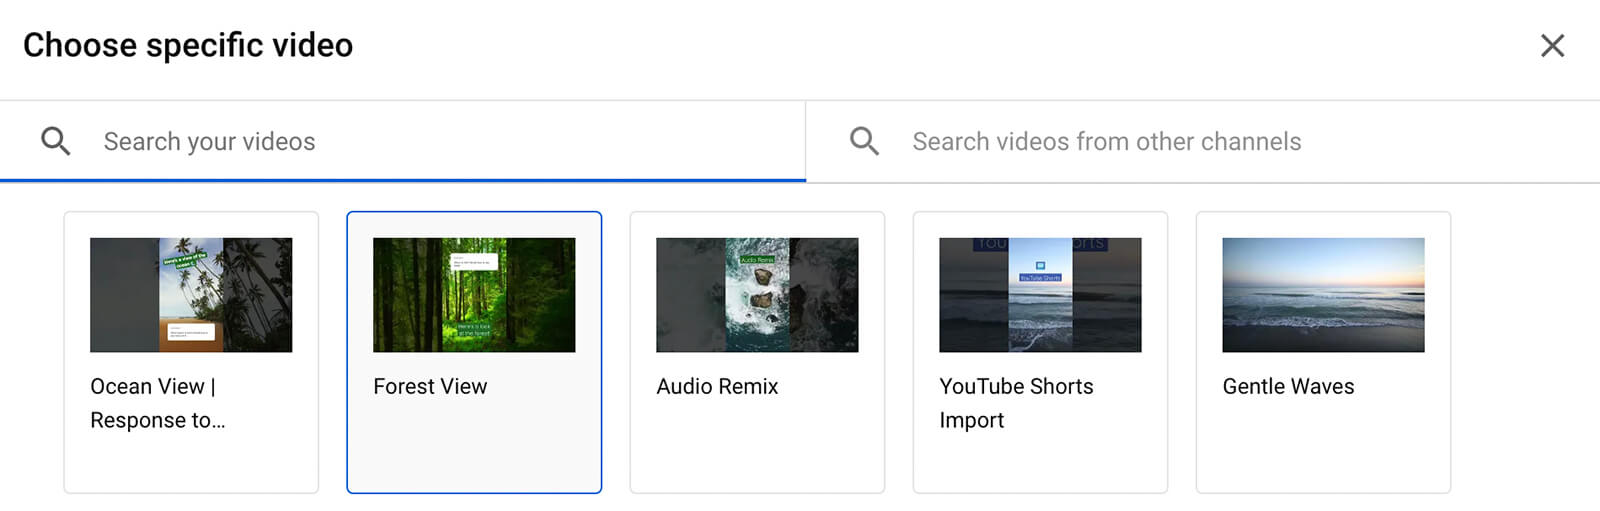 how-to-add-an-info-card-to-your-youtube-video-shorts-content-tab-select-source-videos-editor-tab-click-info-cards-select-video-choose-short-to-link-example-19